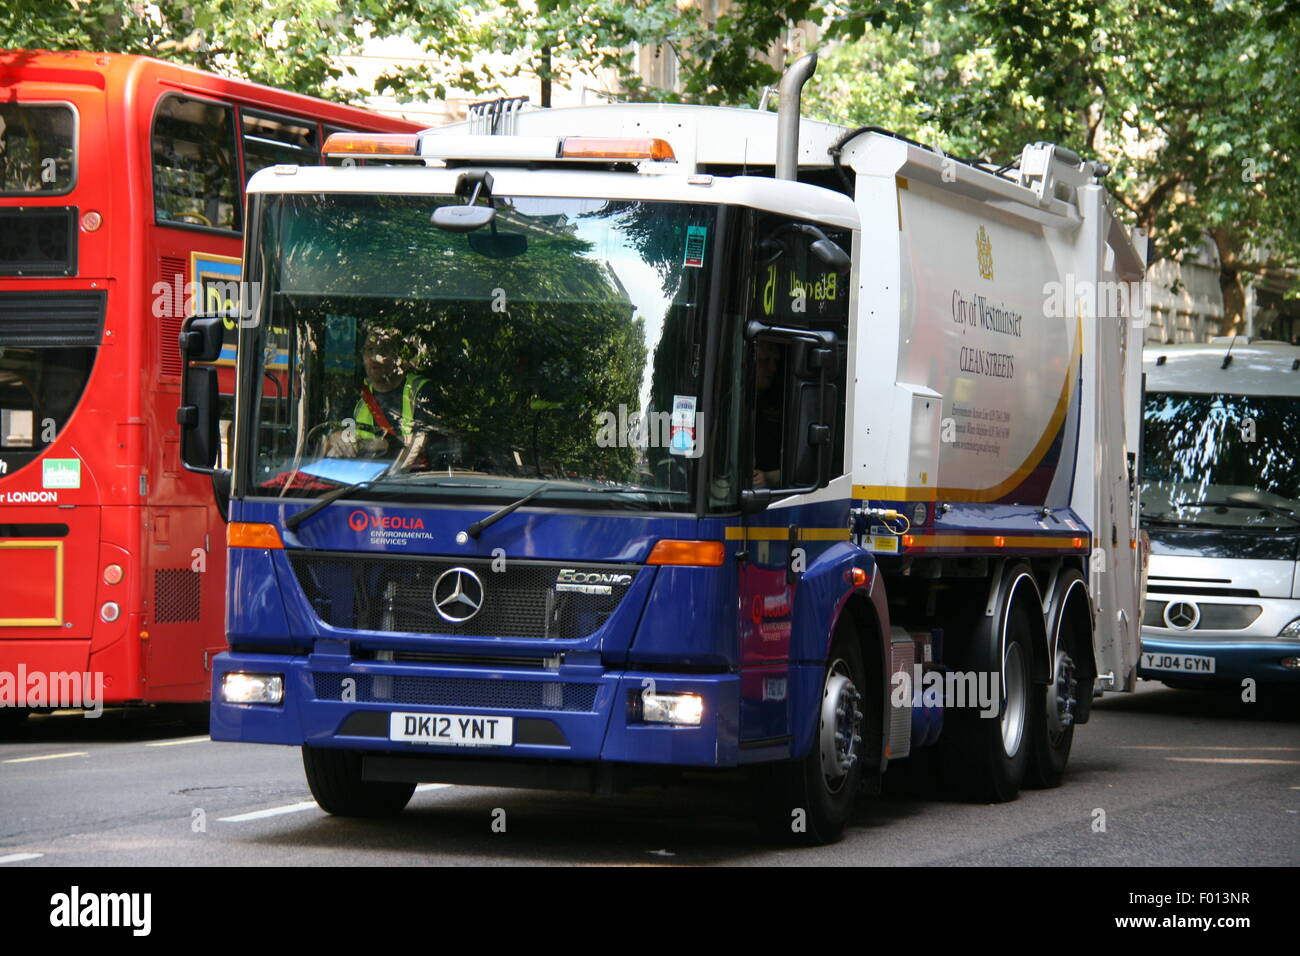 A CITY OF WESTMINSTER IN LONDON REFUSE DUSTBIN LORRY TRUCK Stock Photo